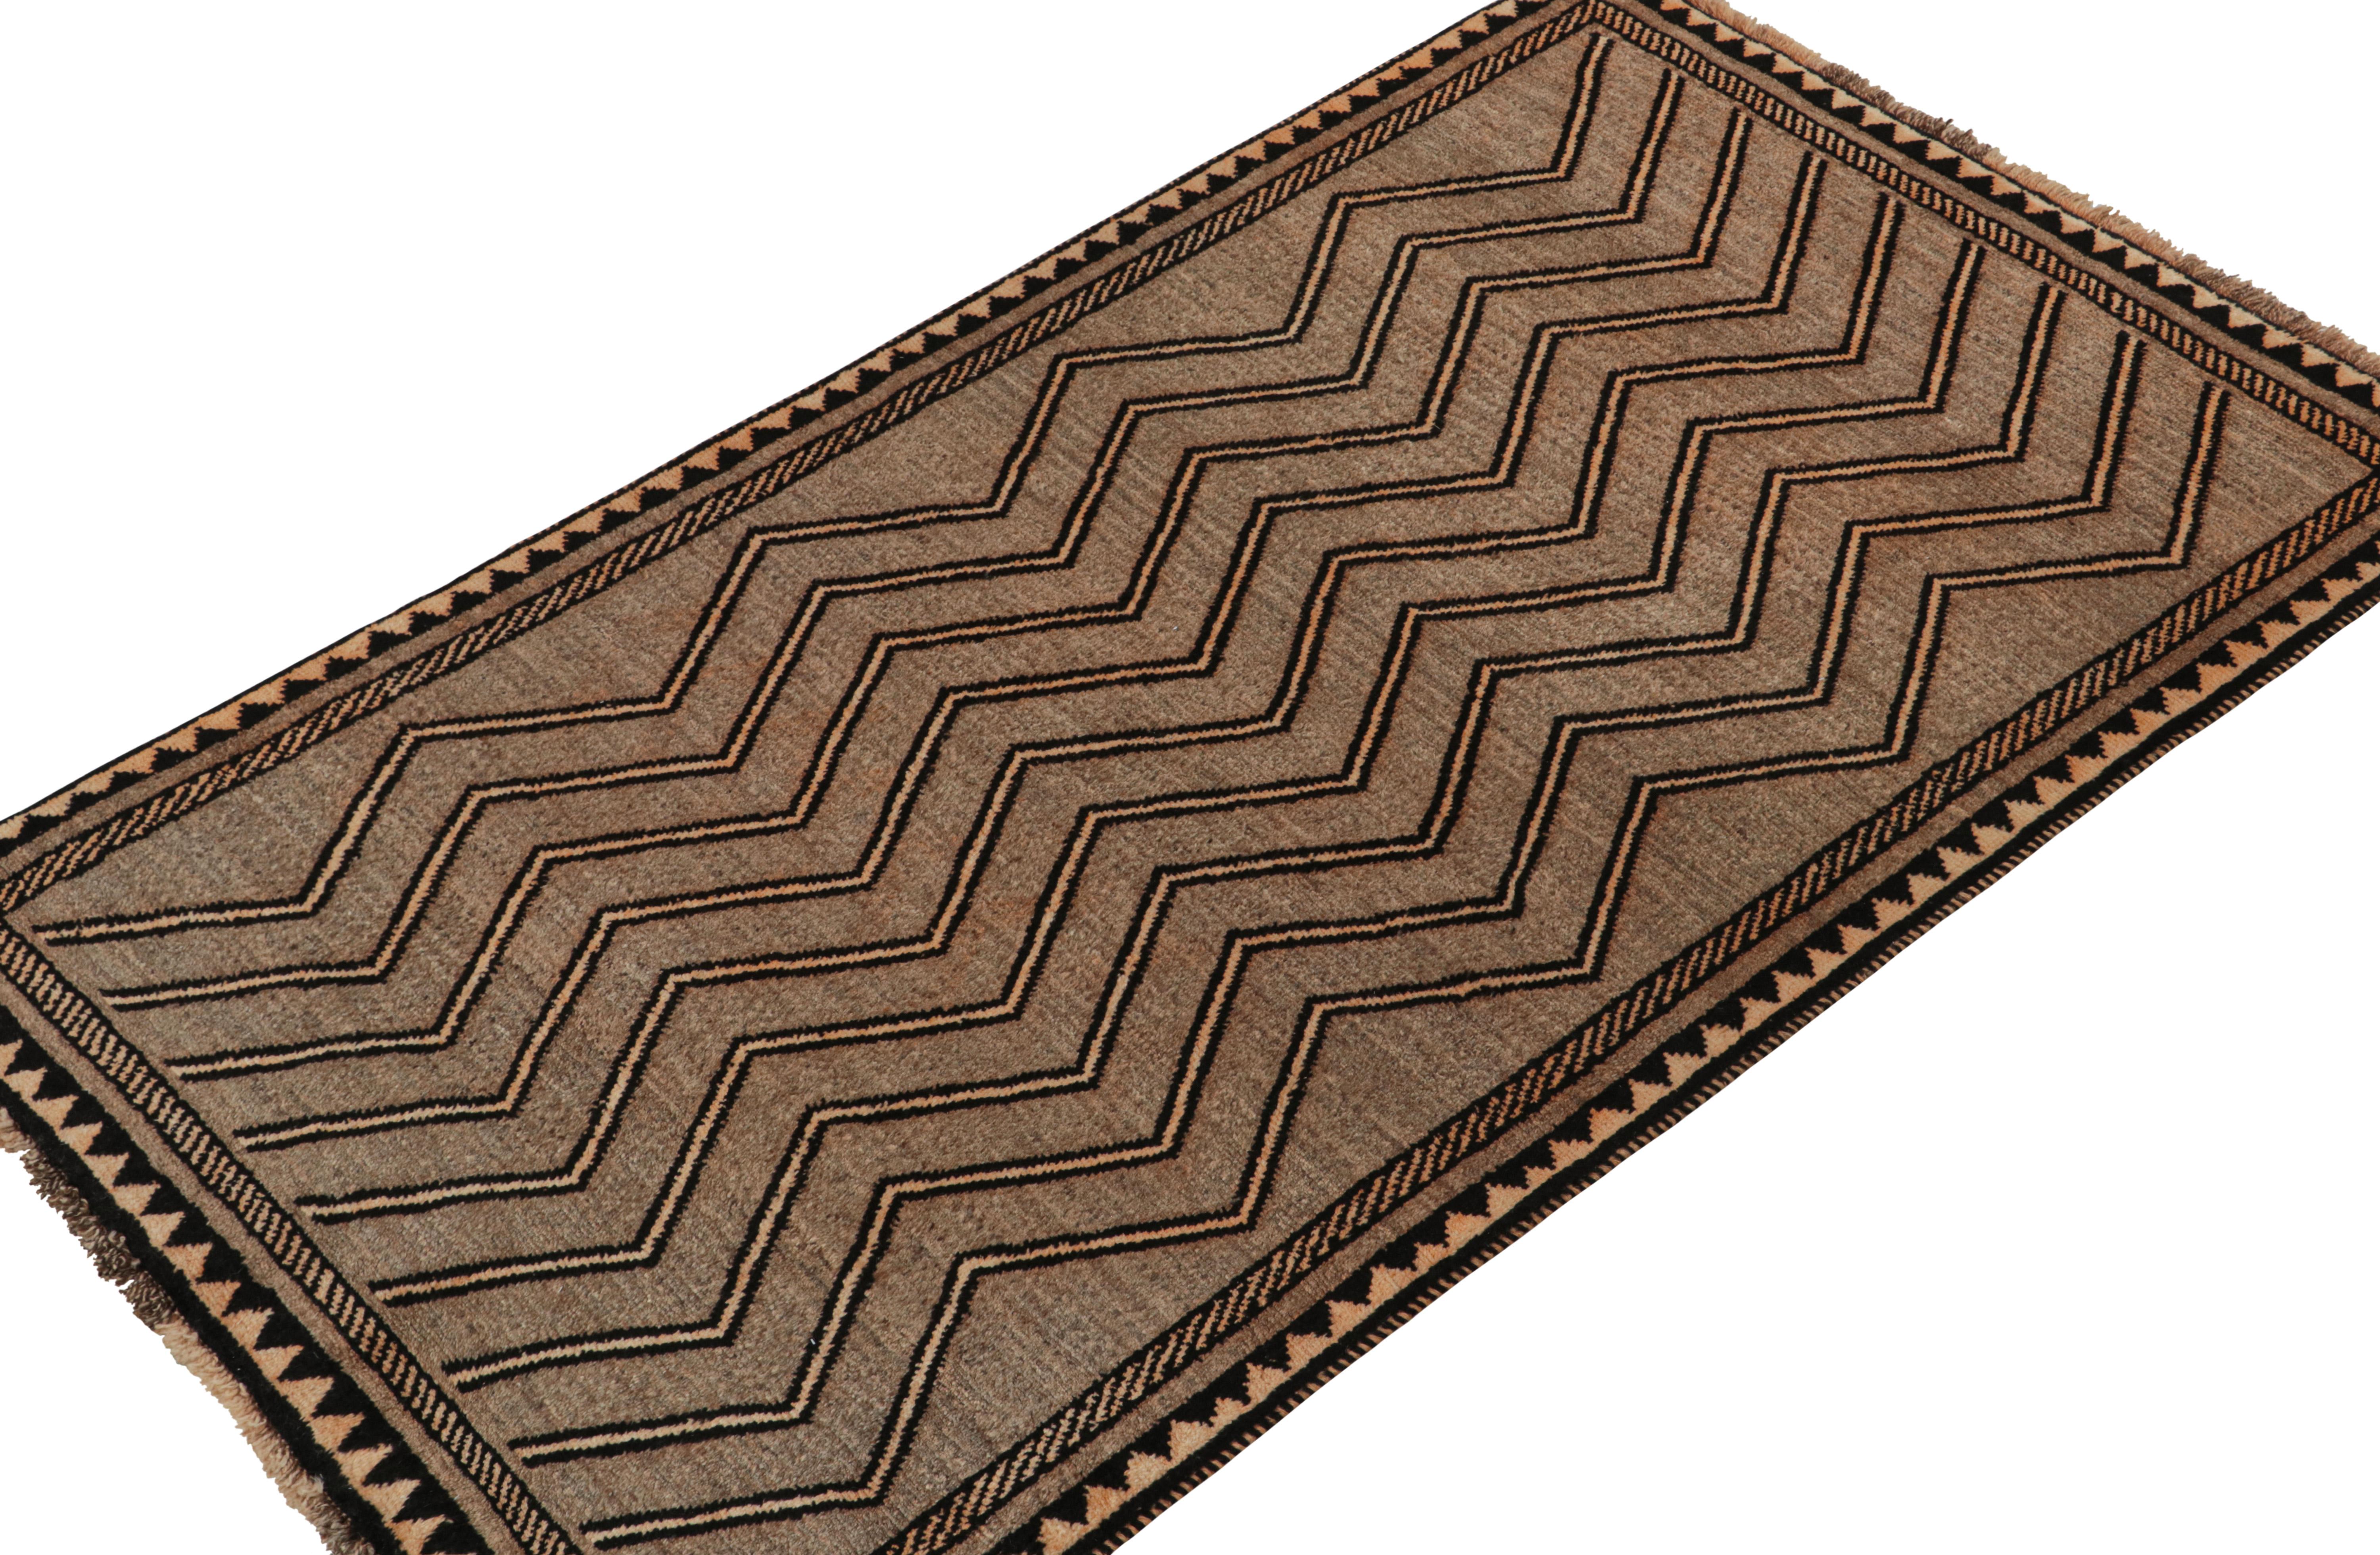 A vintage 4x7 Persian Gabbeh rug in the latest entries to Rug & Kilim’s curation of rare tribal pieces. Hand-knotted in wool circa 1950-1960.

On the Design:

This pattern enjoys chevrons in beige-brown & black. Lush pile further exemplifies the